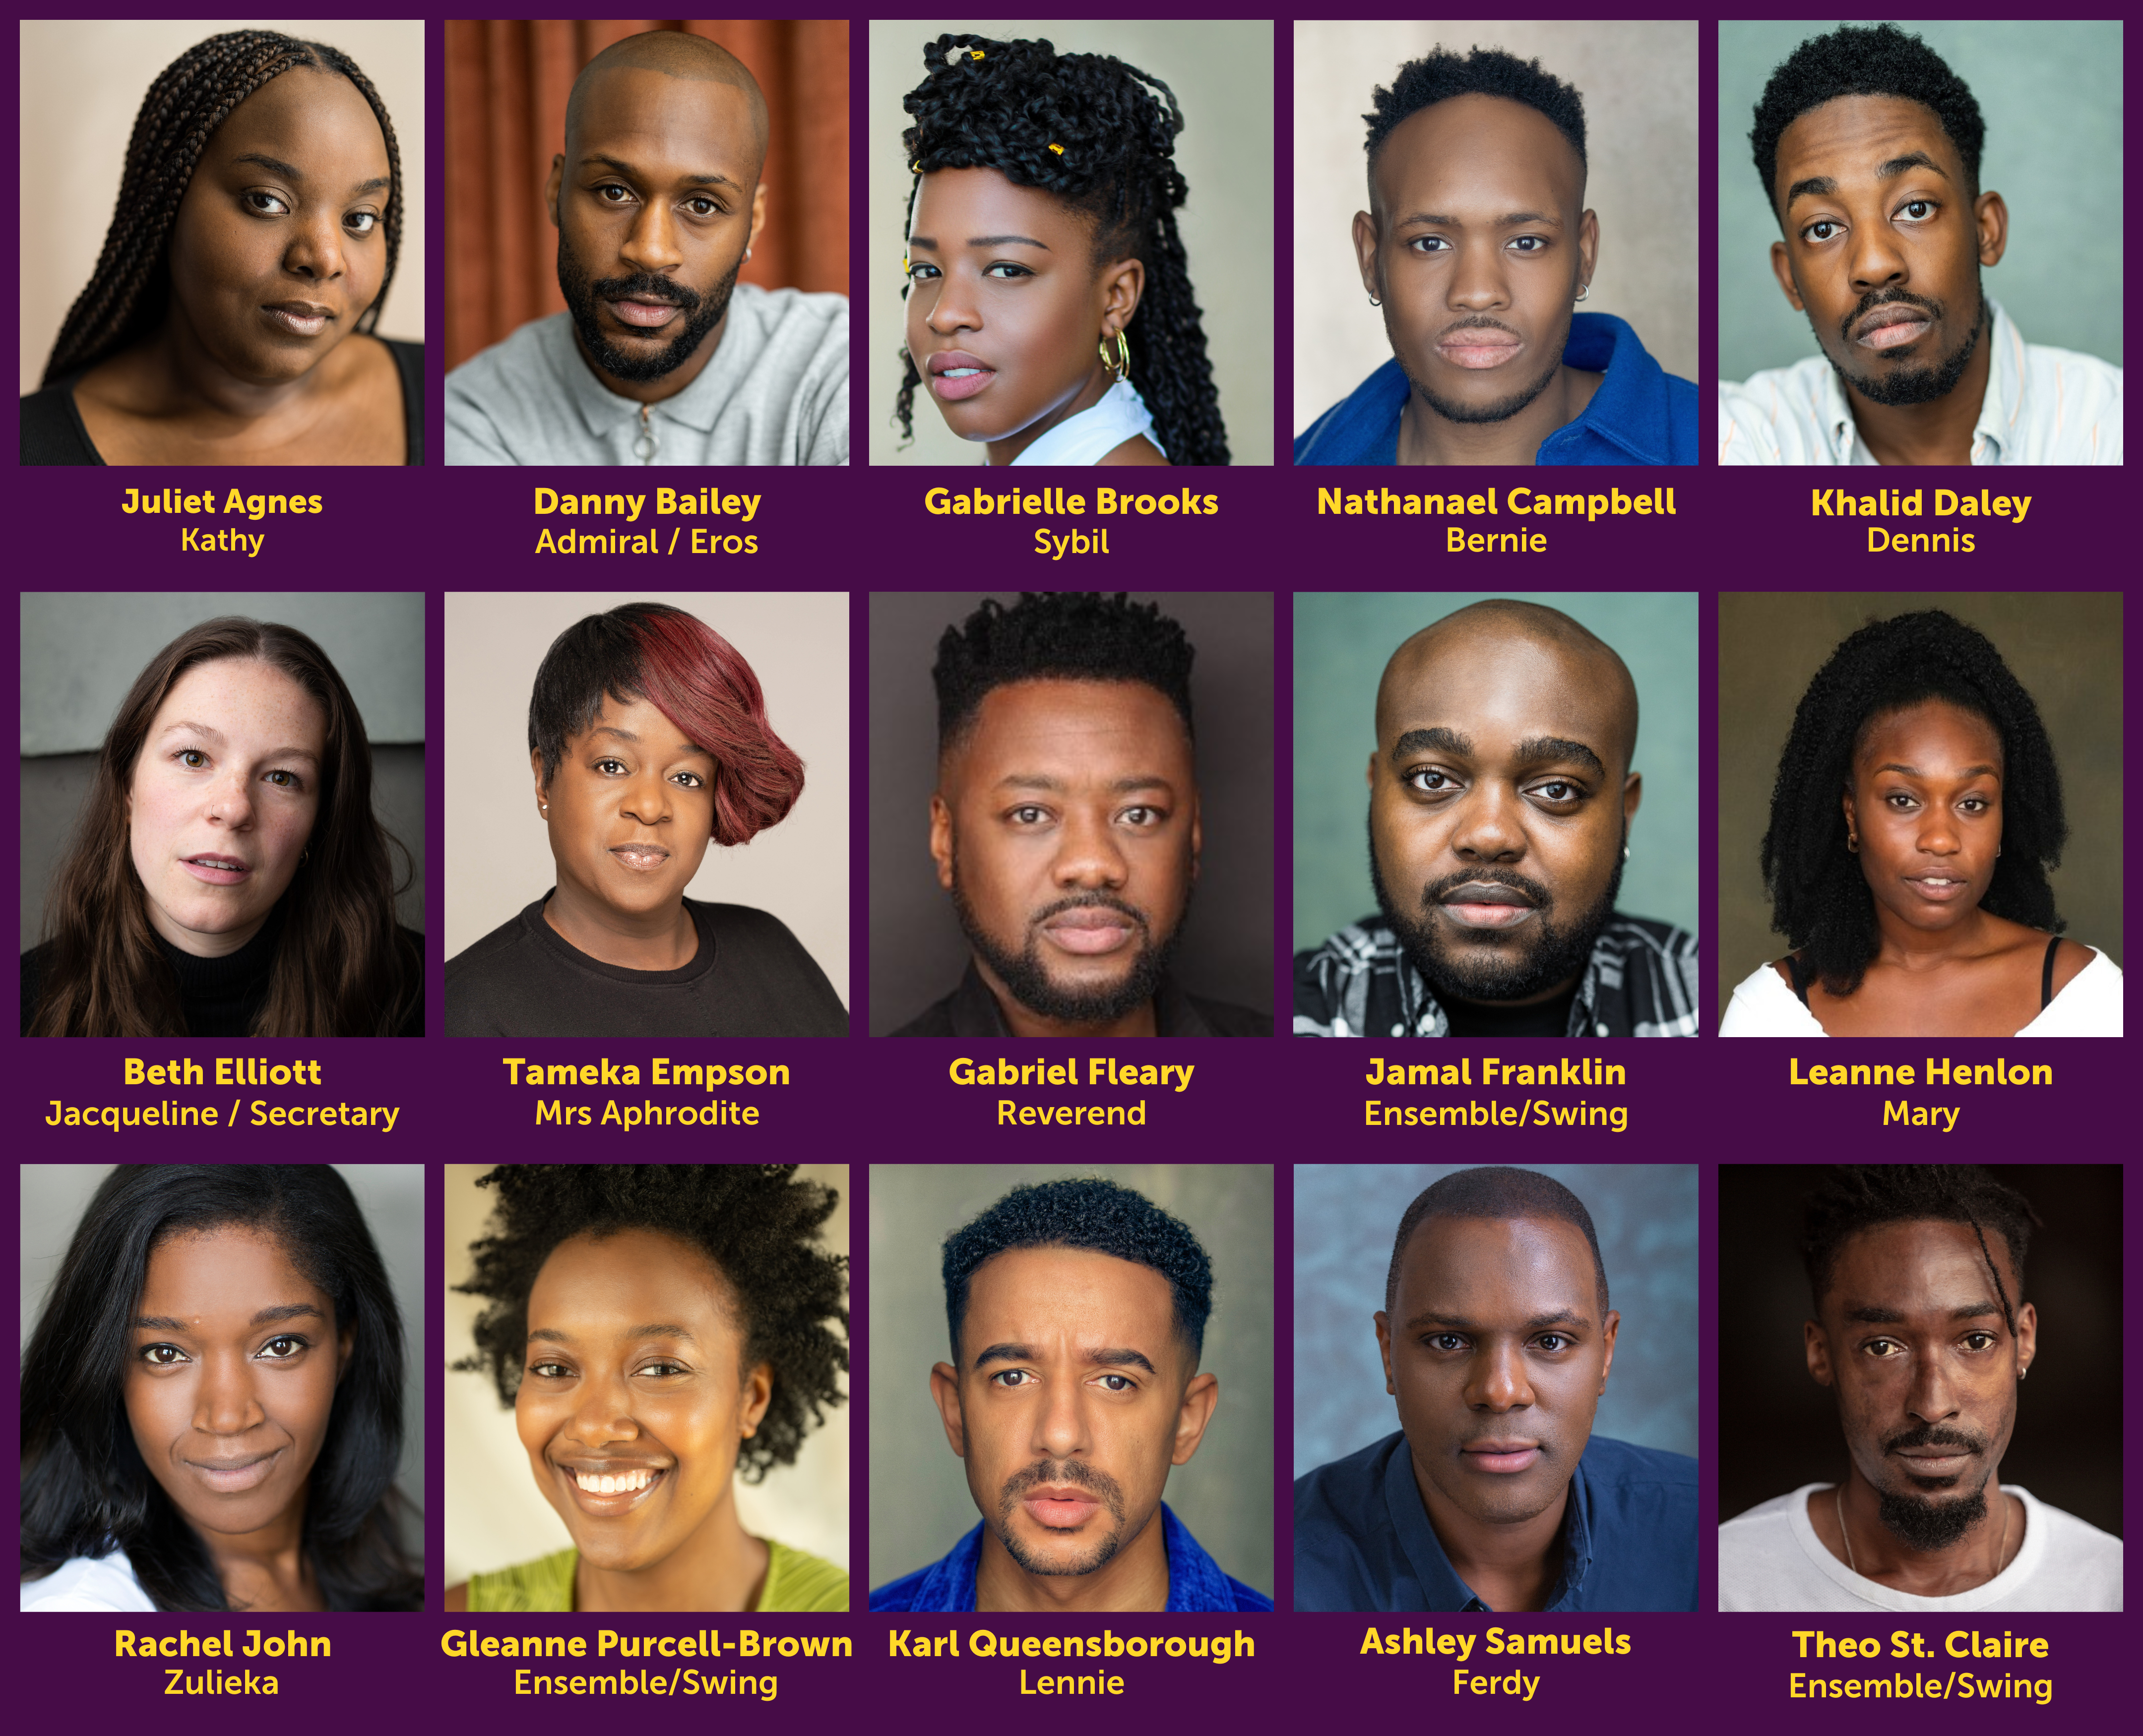 A collection of the cast of The Big Life, arranged on a purple background